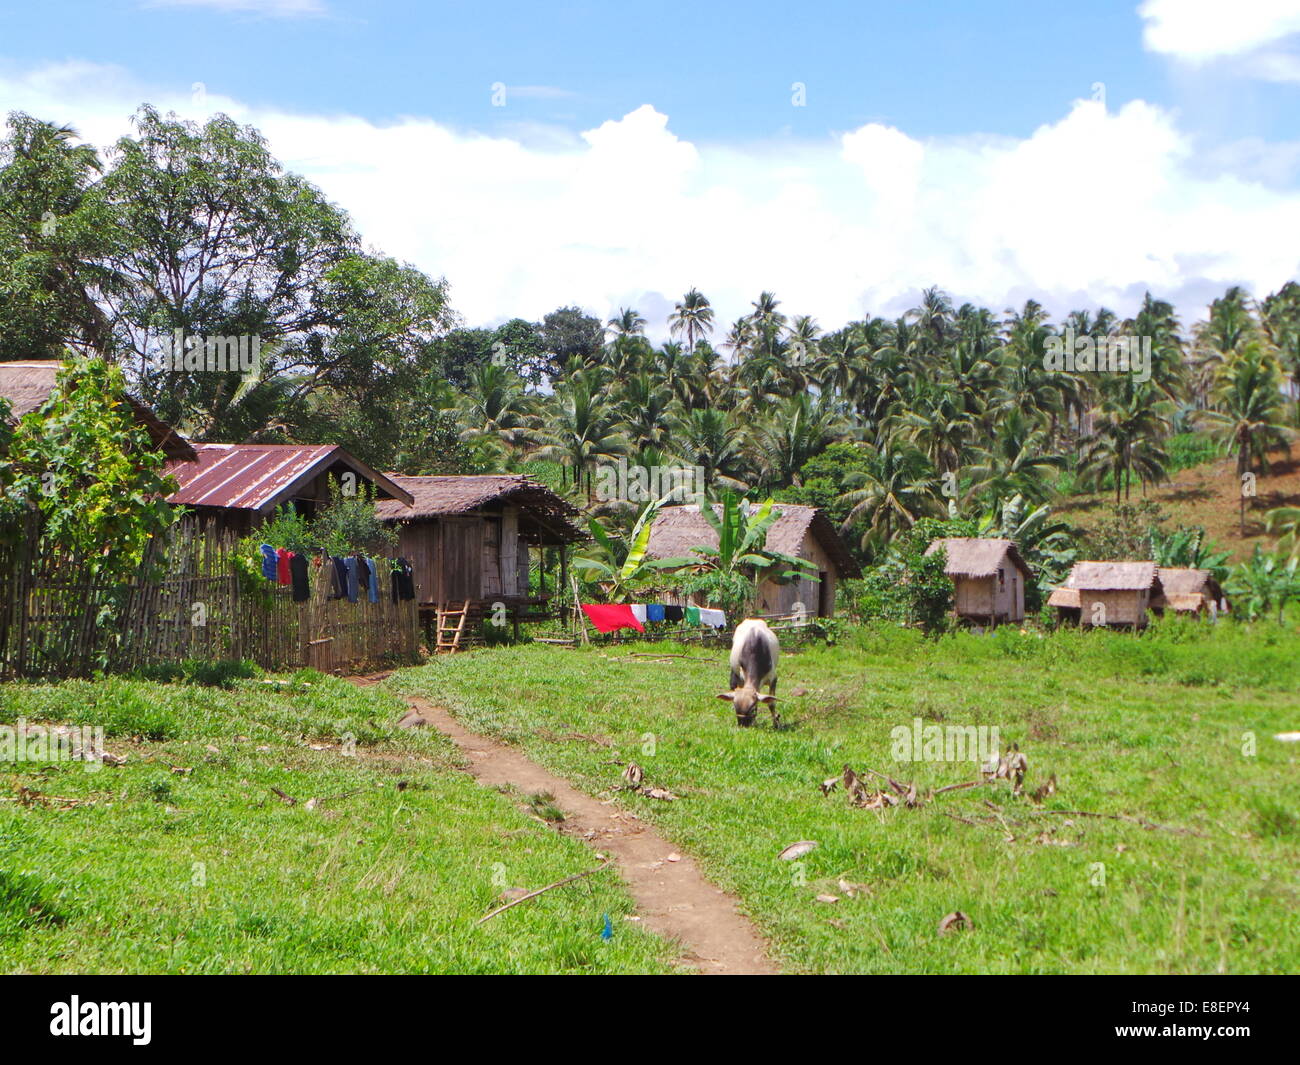 Native houses of Subanen tribe. Subanen is one of the endangered tribes in Mindanao. Dumingag town in Zamboanga del Sur province in the island of Mindanao is adhering in preserving the cultures and traditions of their town, as a matter of fact during town fiestas, pop dance are prohibited and traditional songs and dances are promoted to alleviate their cultural pride. © Sherbien Dacalanio/Pacific Press/Alamy Live News Stock Photo